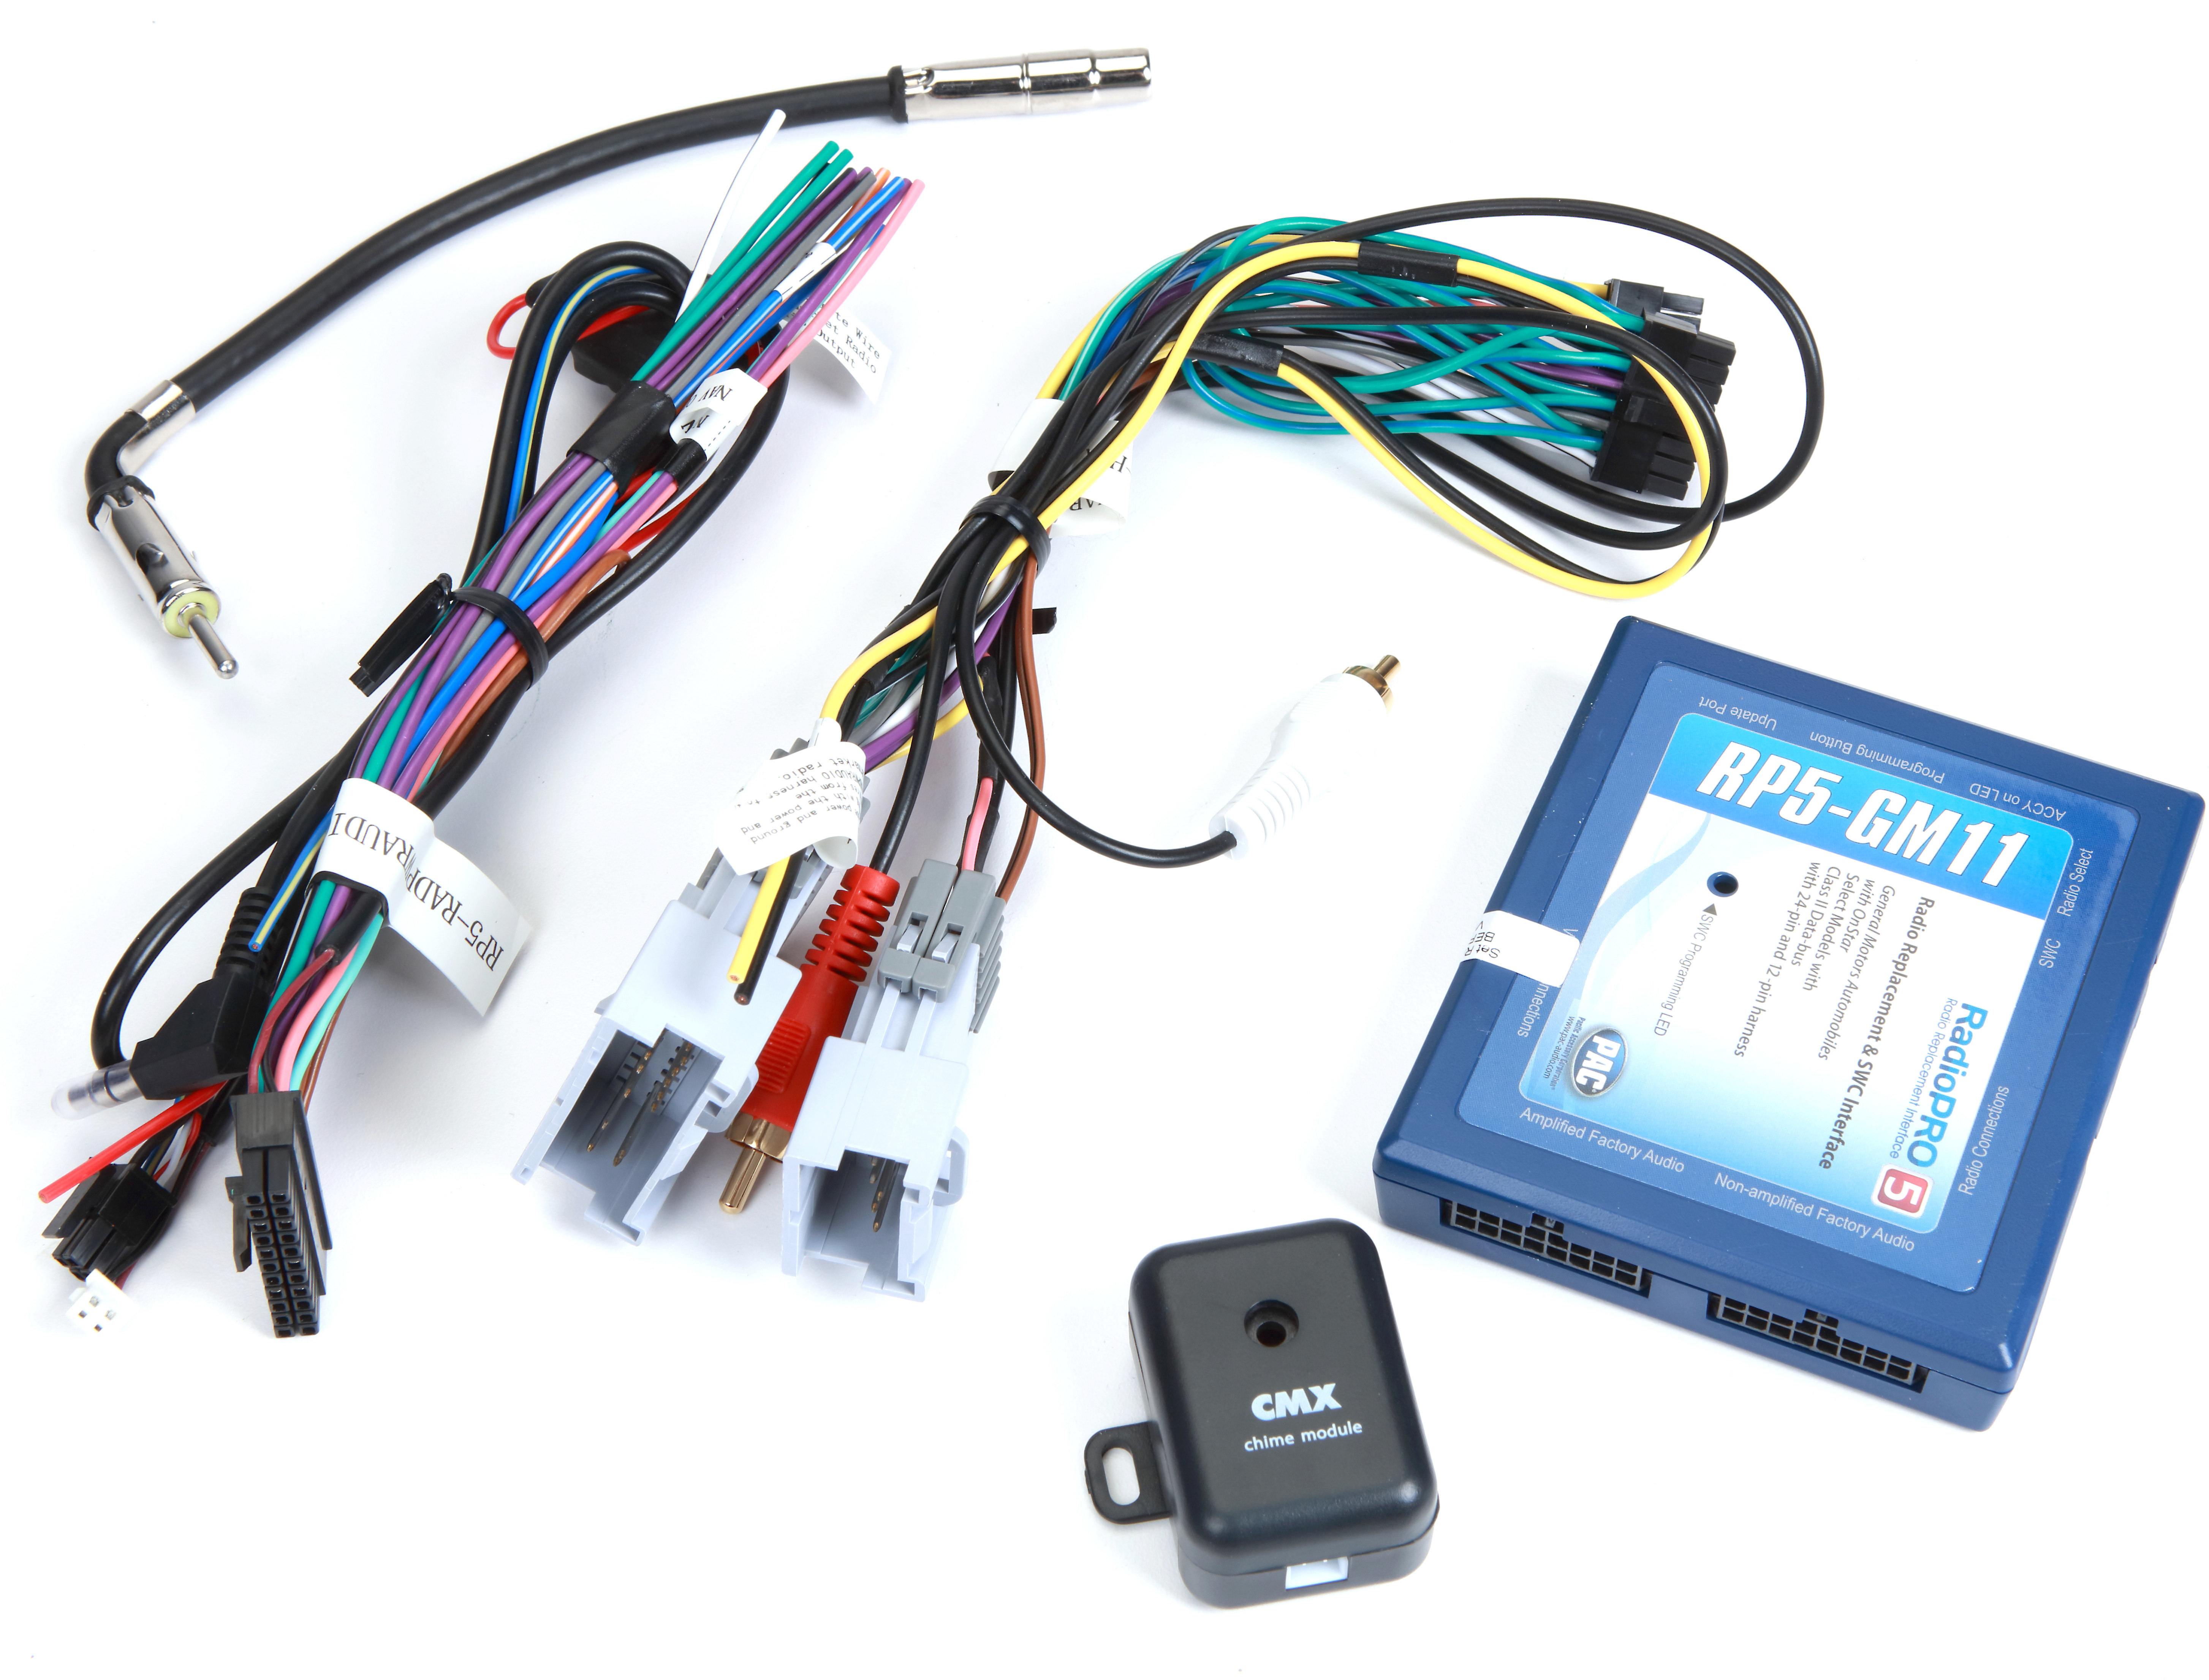 PAC RP5-GM11 Wiring Interface Connect a new car stereo and ... 2006 chevrolet malibu stereo wiring diagram 